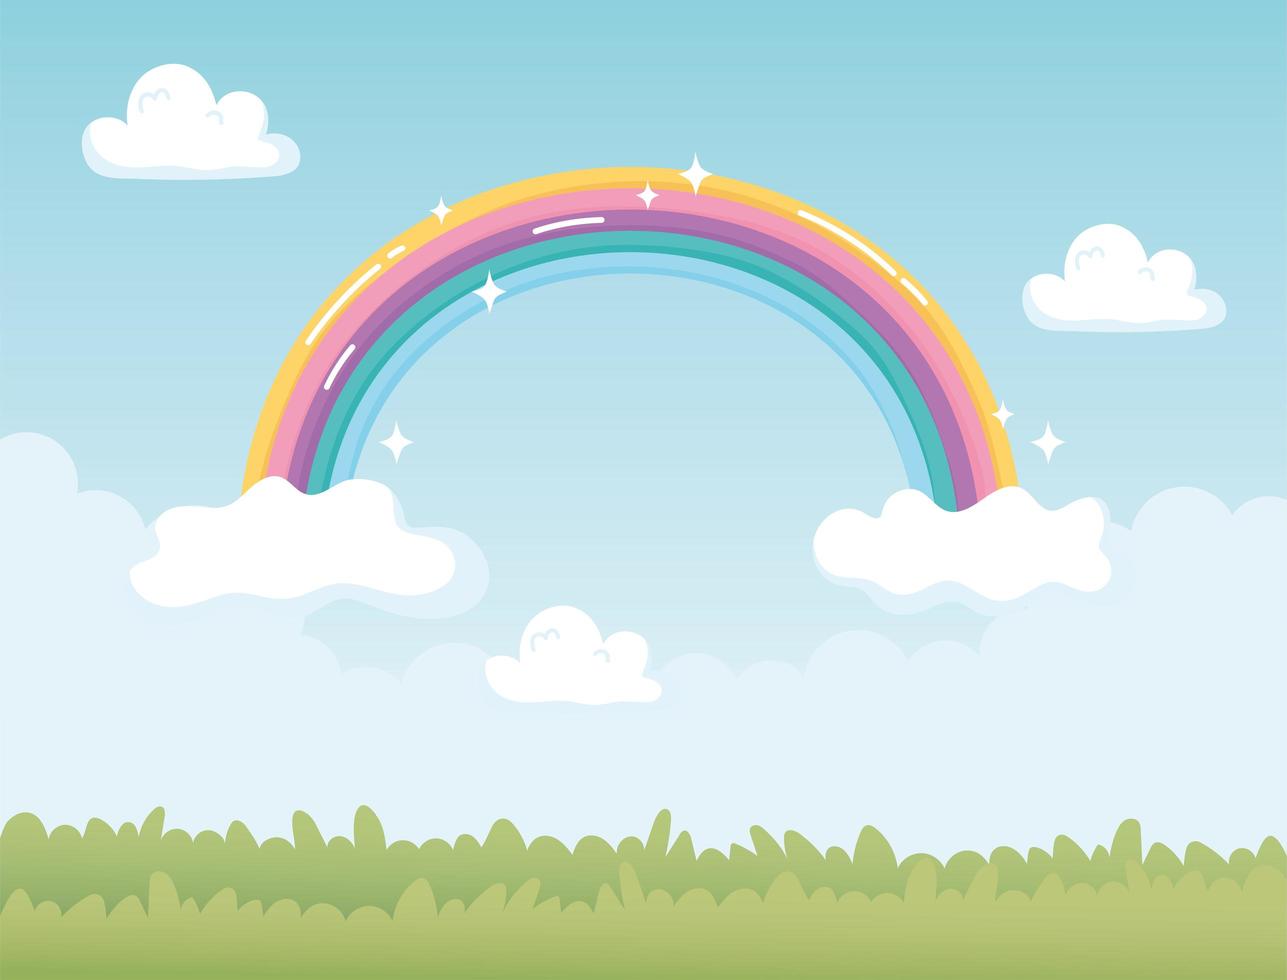 fantasy landscape nature rainbow with clouds cartoon vector